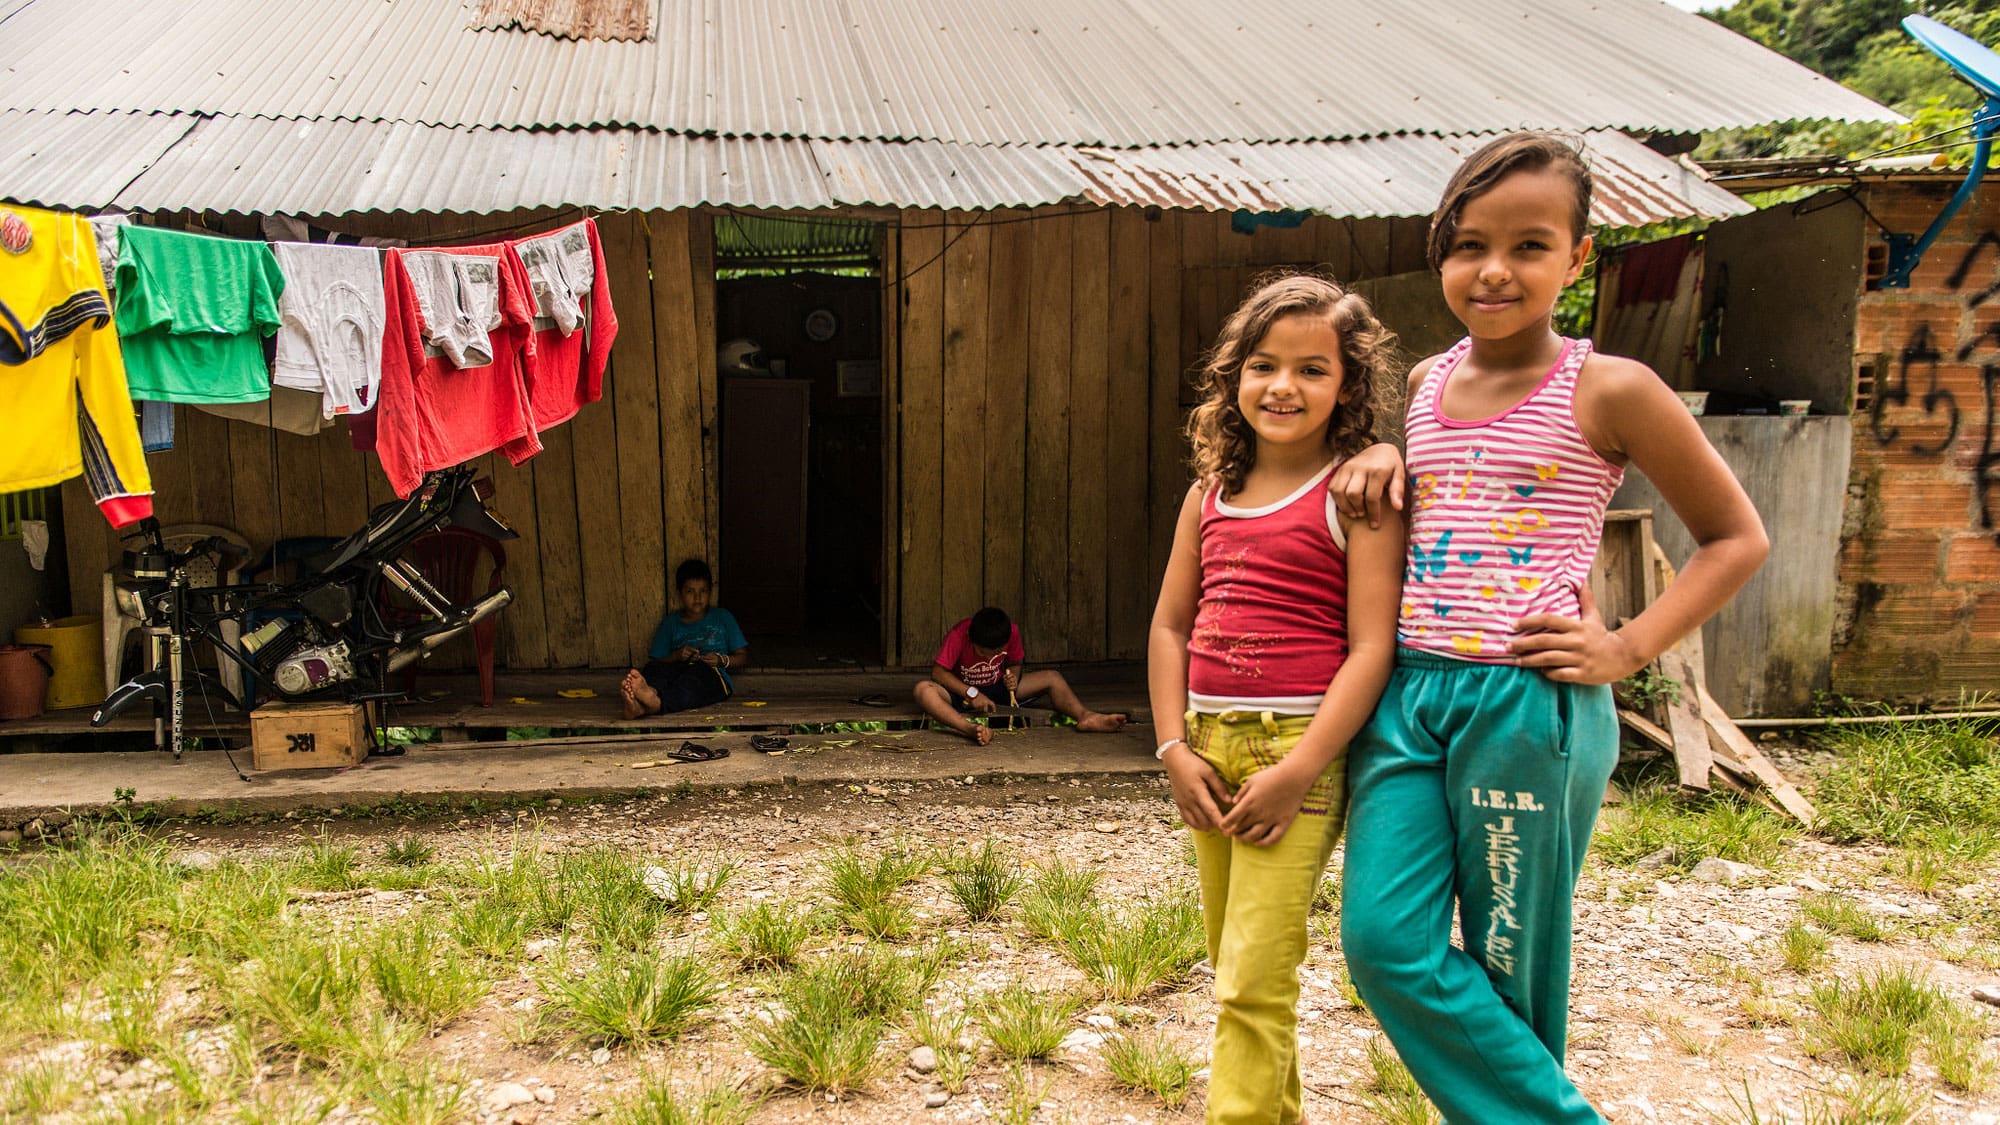 Children standing in front of a house in rural village in Colombia